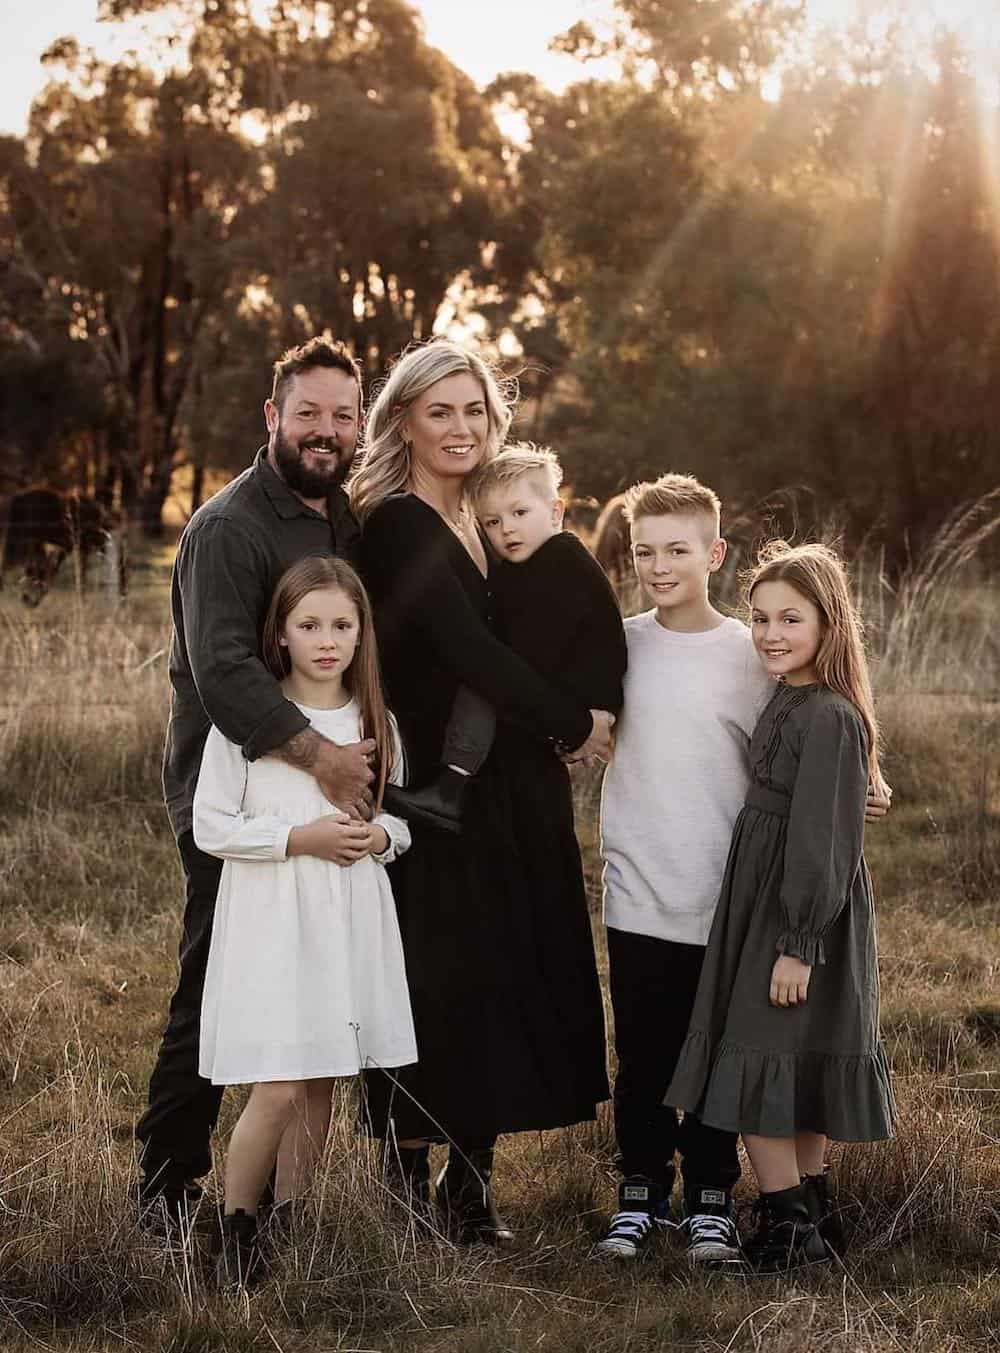 a winter family photoshoot with outfits featuring black, white, and grey outfits